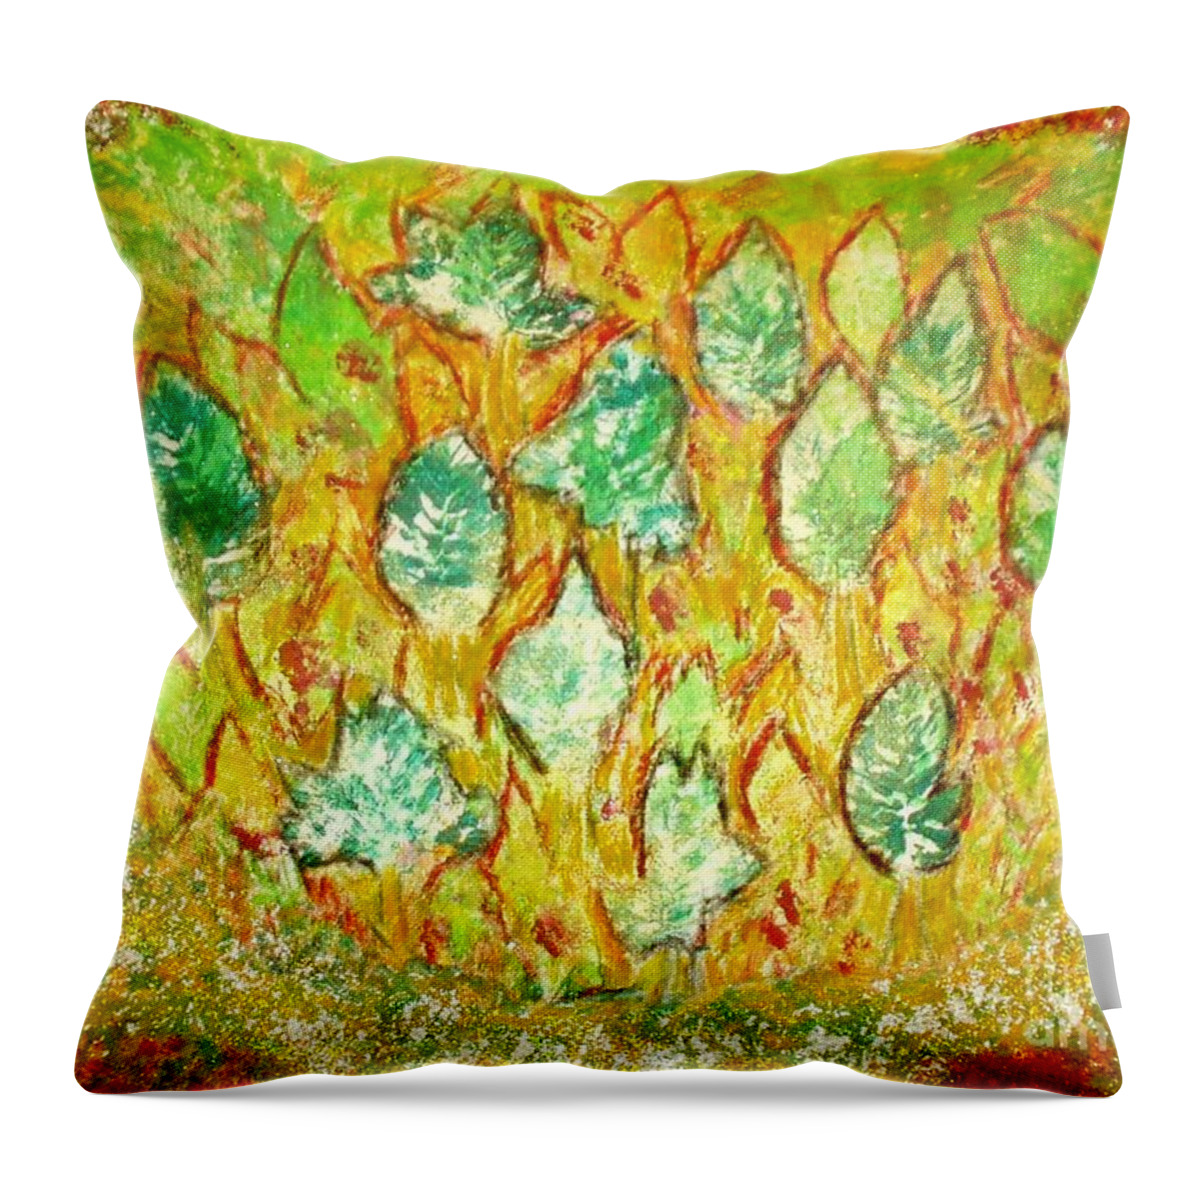 Leaves Throw Pillow featuring the painting Jungle by Pilbri Britta Neumaerker